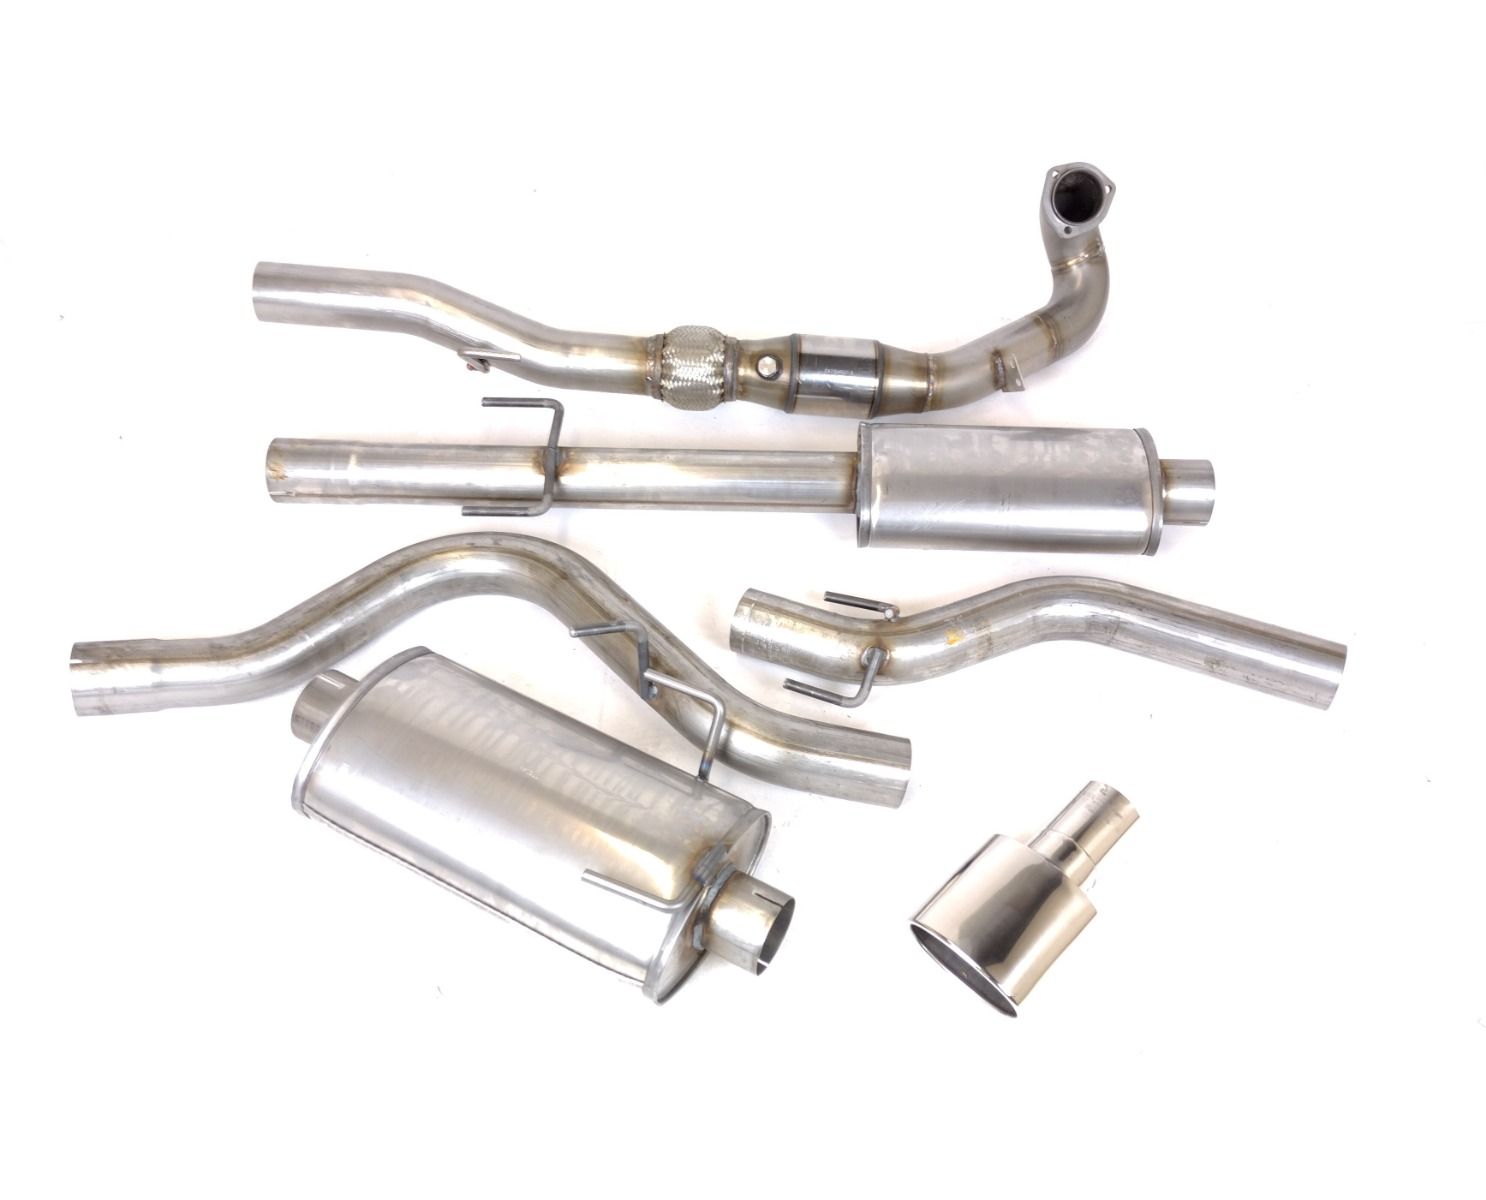 https://www.maptunparts.eu/img-products/L/16946/complete-exhaust-9-5-2004-with-sport-cat-2-silencers.jpg